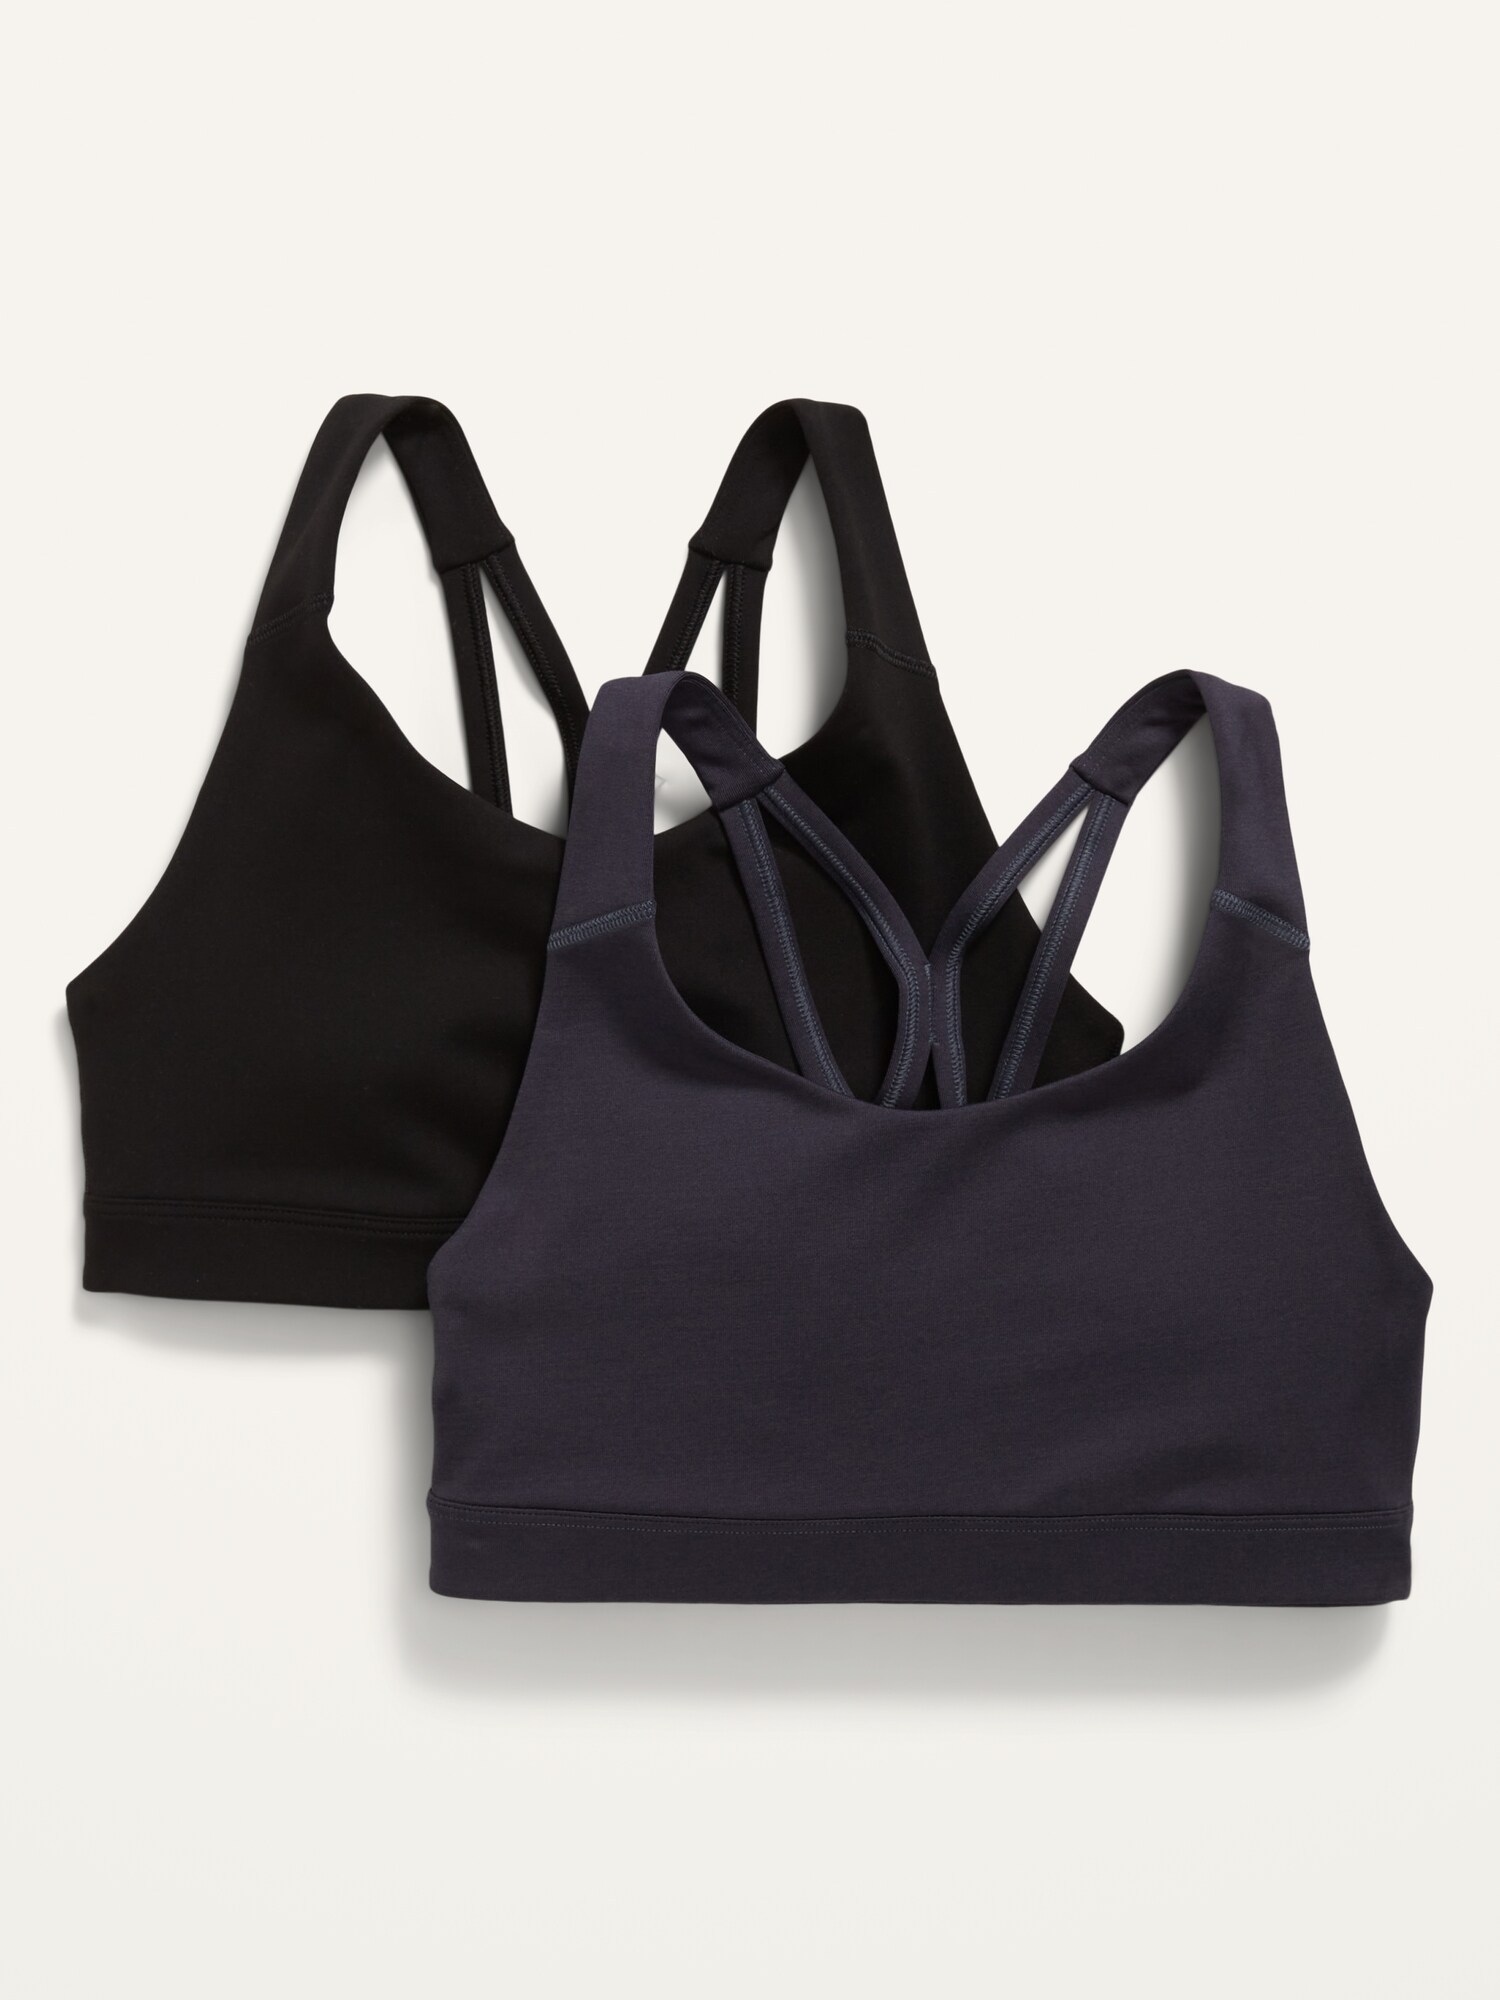 Medium Support Strappy Sports Bra 2-Pack for Women